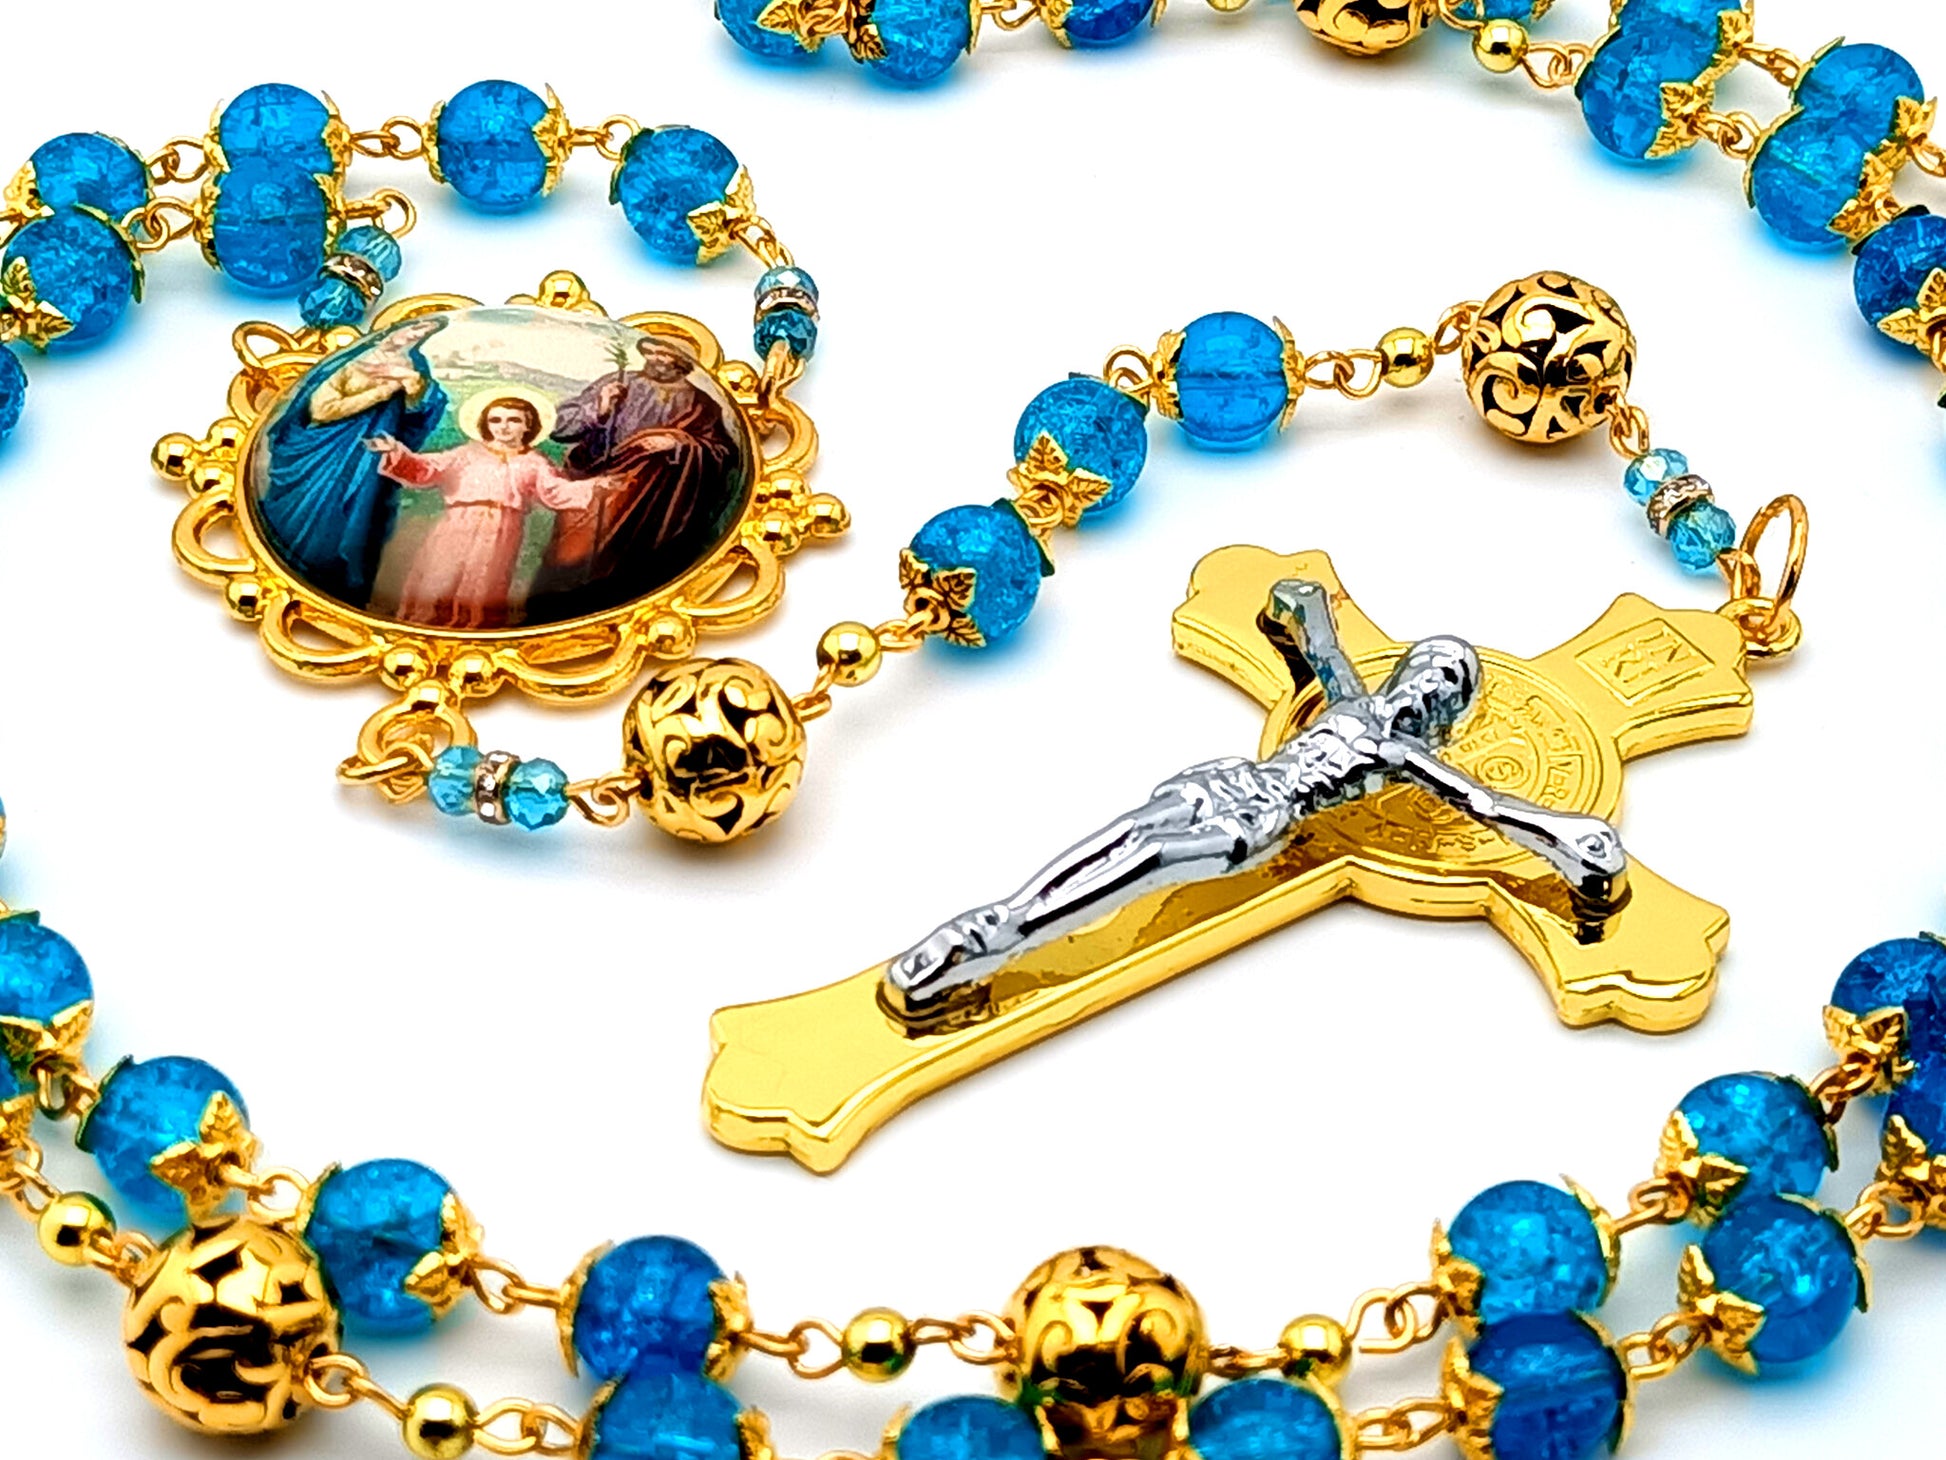 Holy Family unique rosary beads with blue glass and gold beads and large gold plated Saint Benedict crucifix.